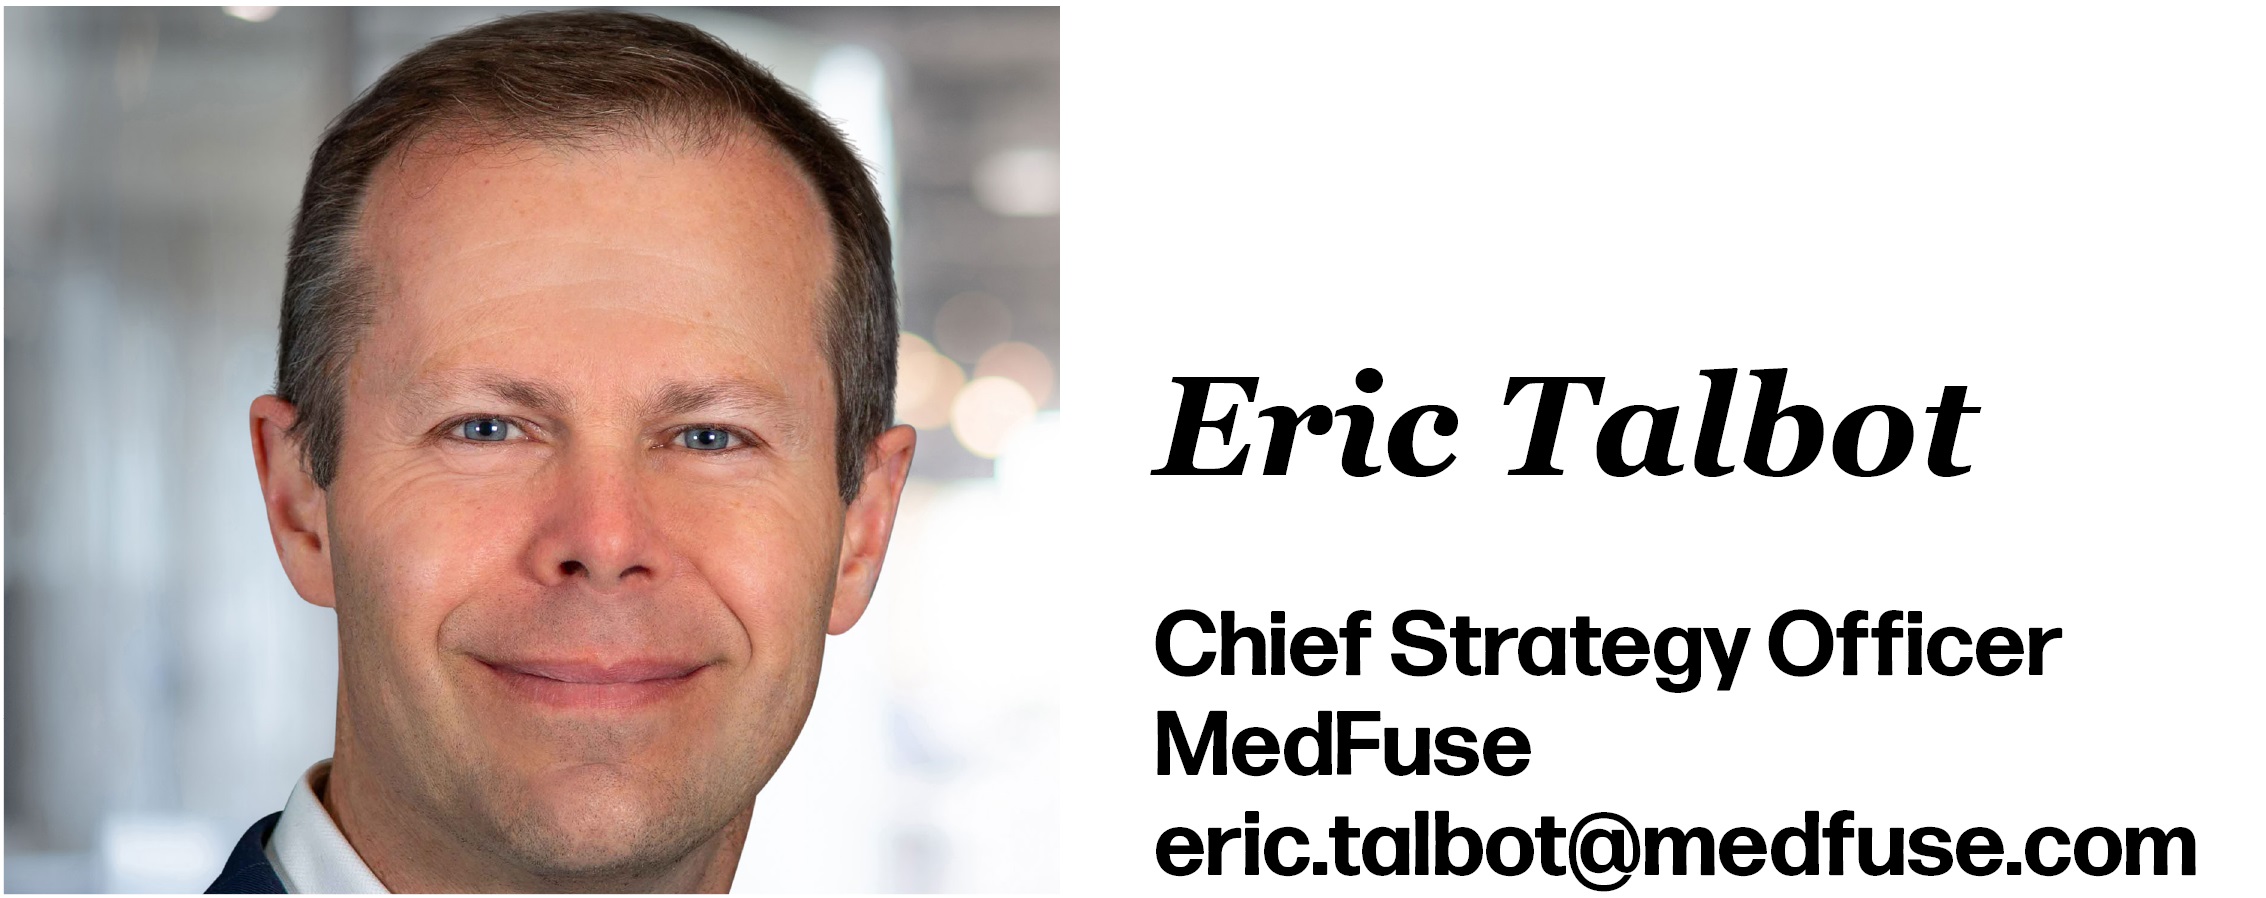 Eric Talbot is Chief Strategy Officer at MedFuse. His email is eric.talbot@medfuse.com. 